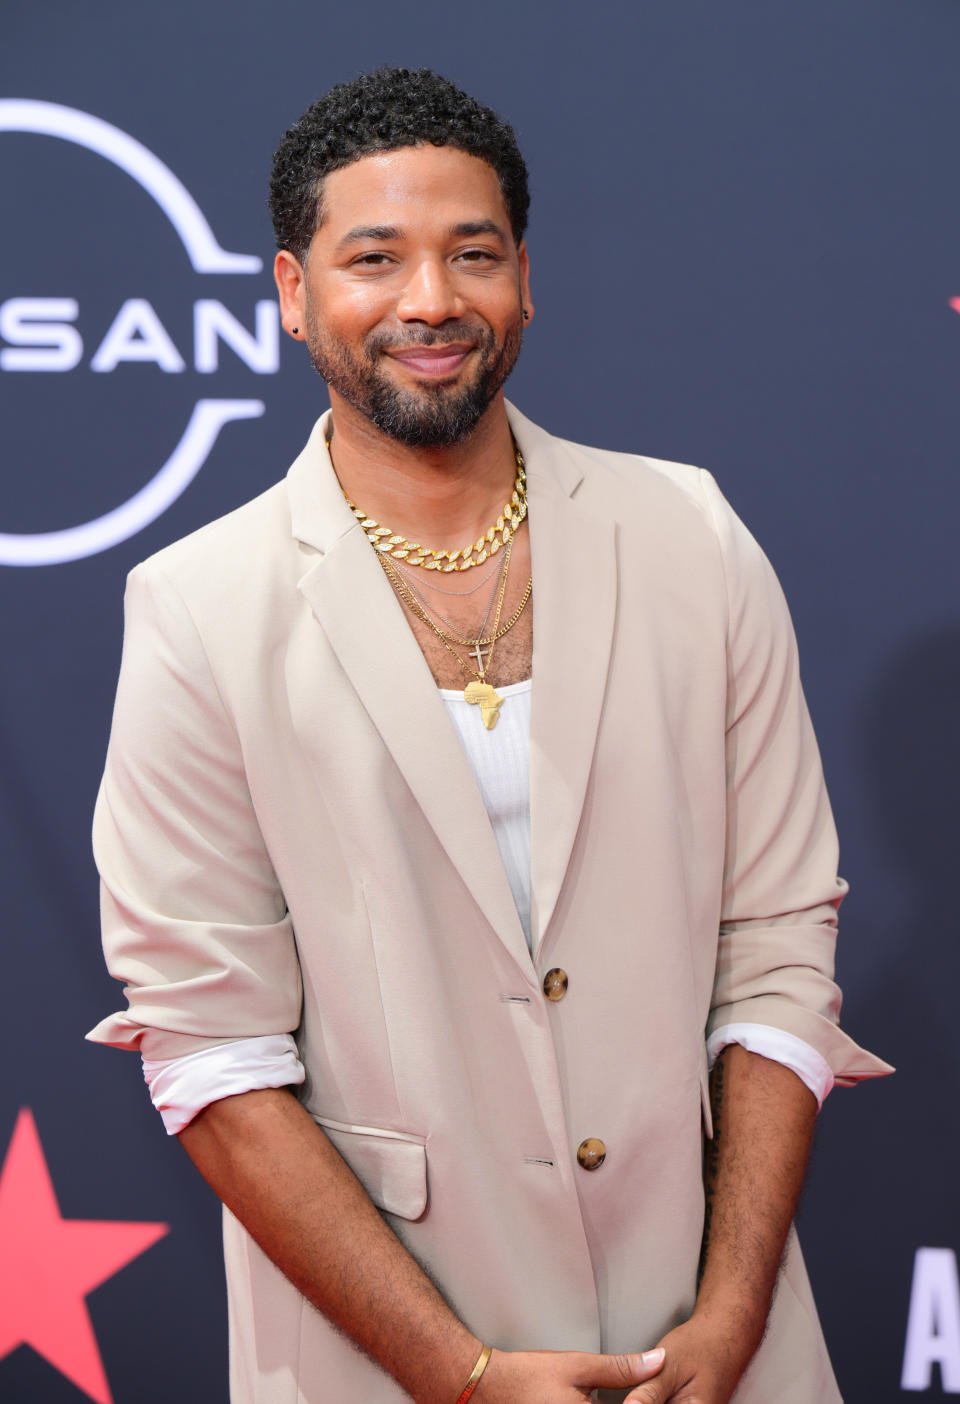 LOS ANGELES, CALIFORNIA - JUNE 26: Jussie Smollett attends the 2022 BET Awards at Microsoft Theater on June 26, 2022 in Los Angeles, California.(Photo by Prince Williams/ Getty Images)